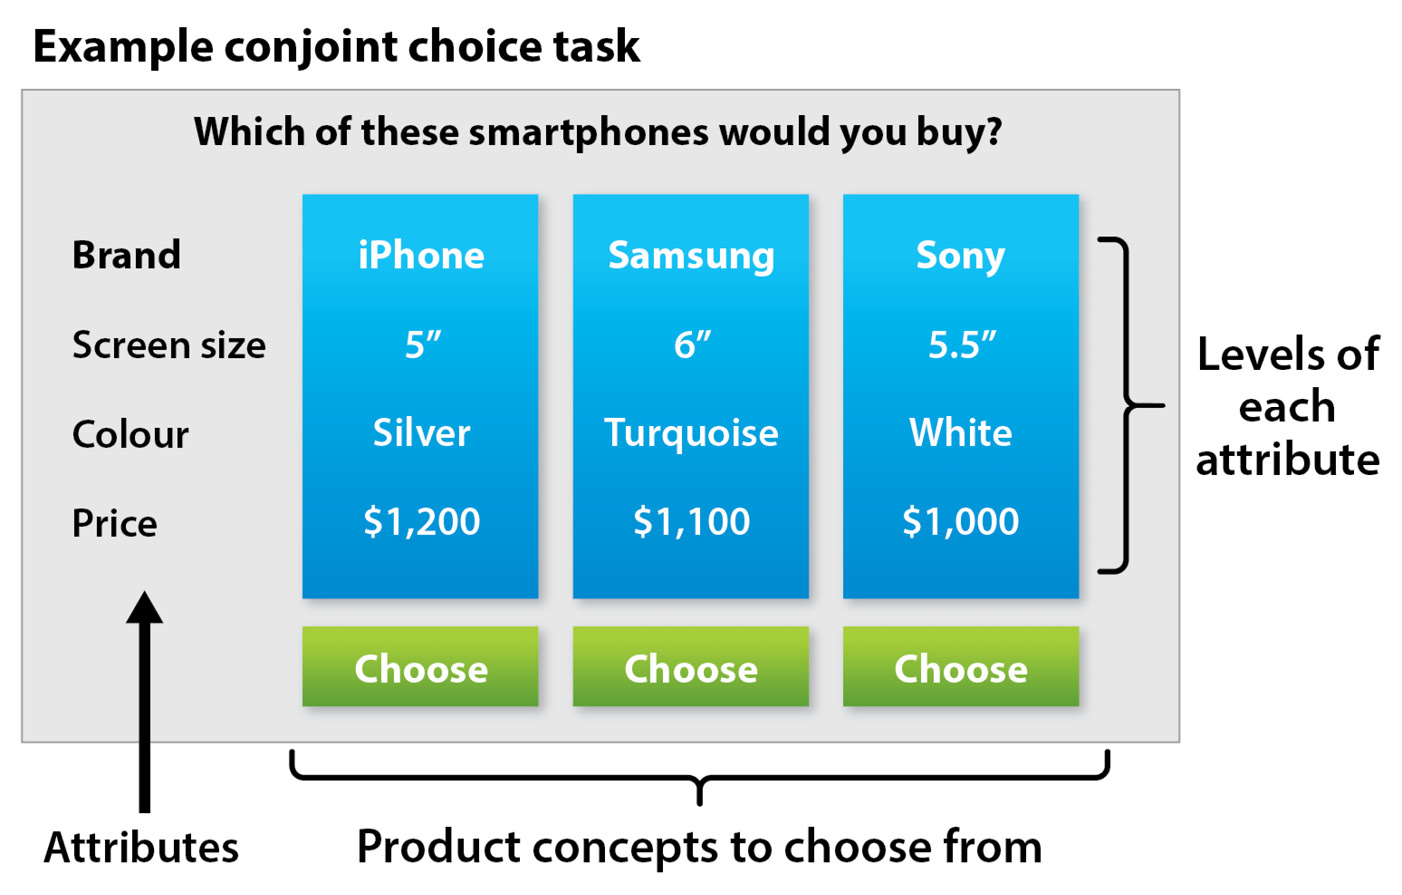 Figure 4.2: Conjoint choice task
